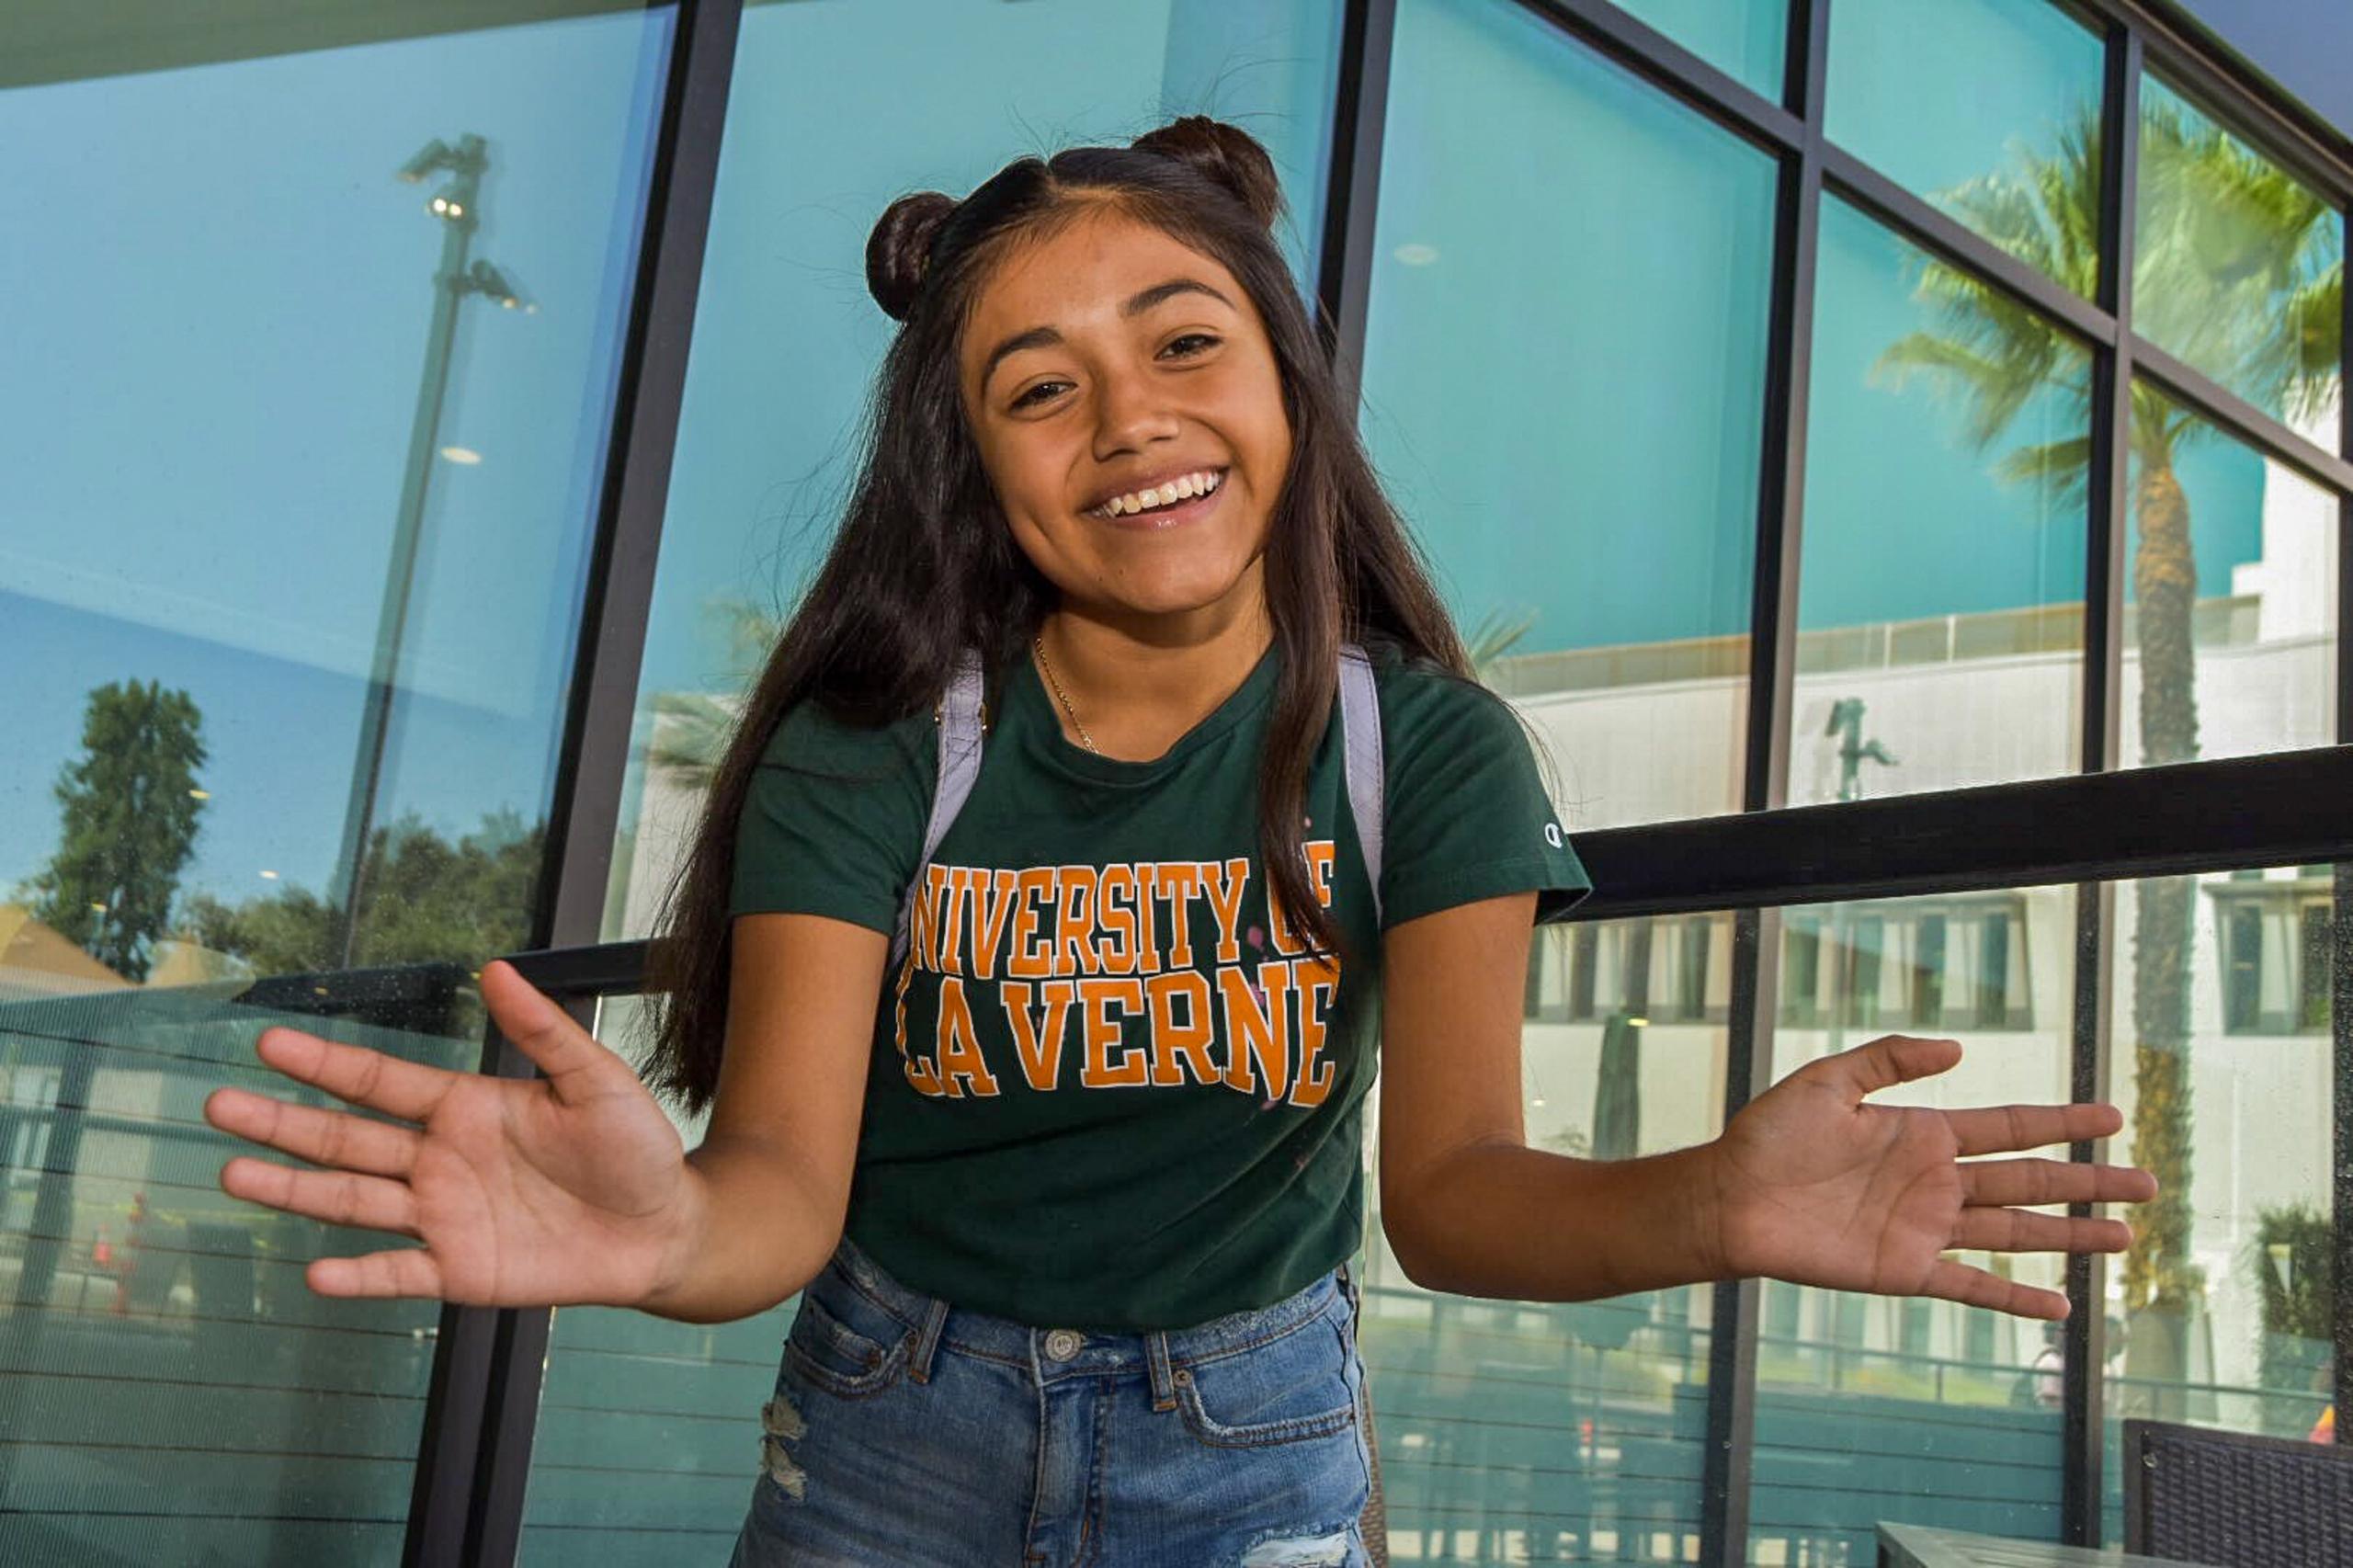 Student smiles on move-in day